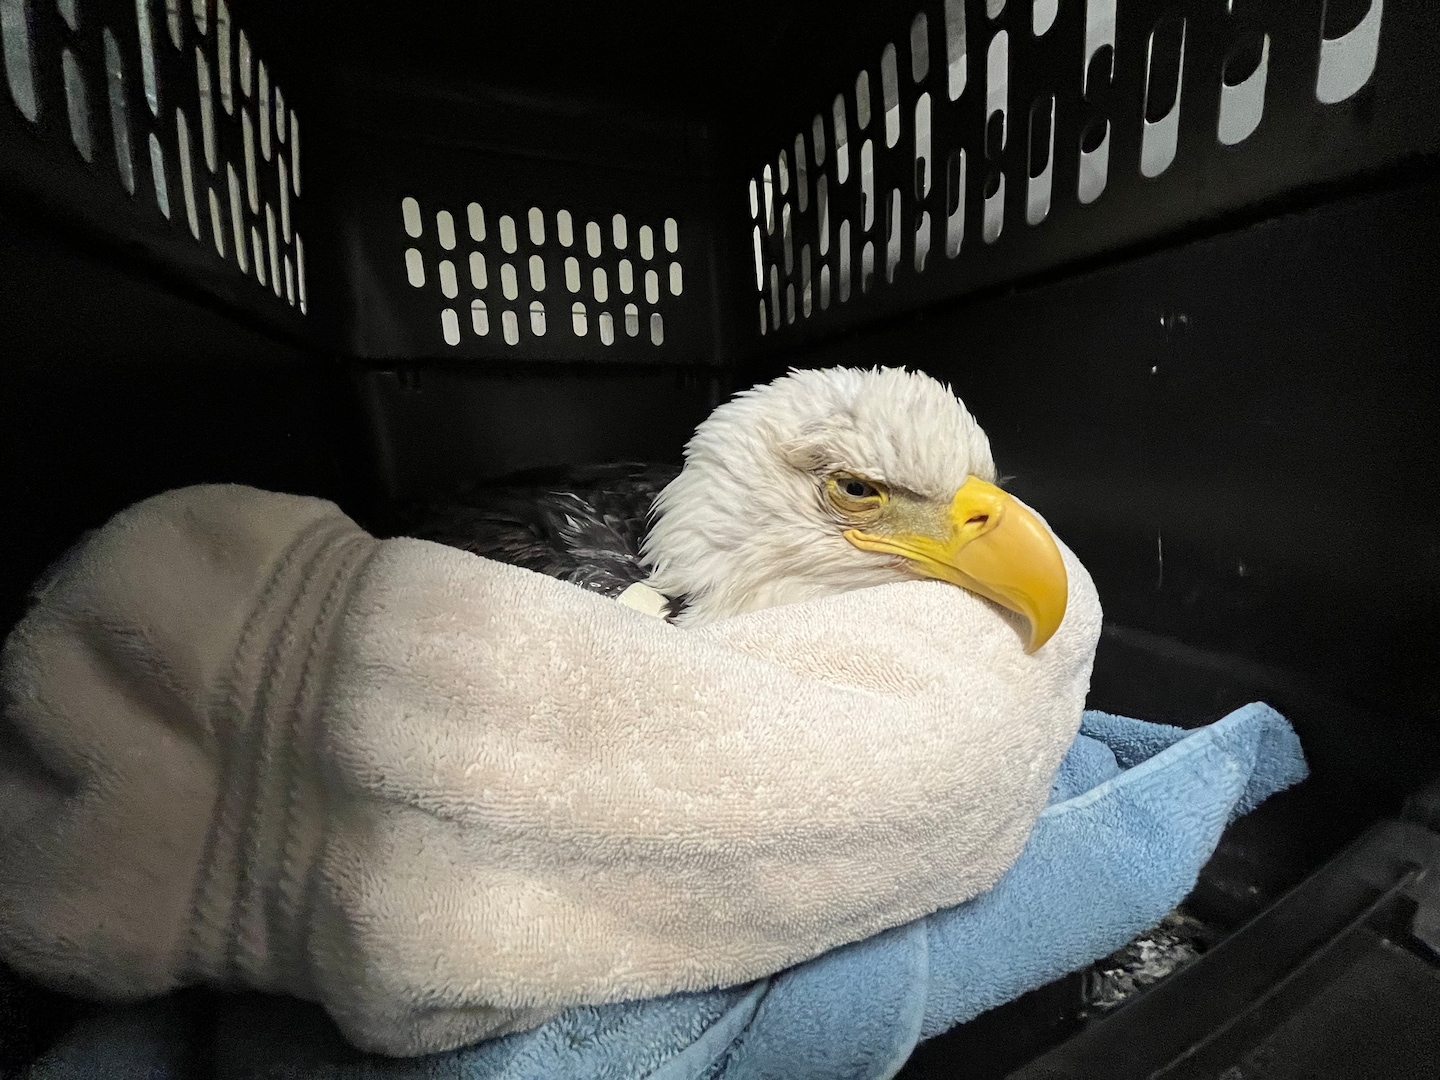 Bald eagles poisoned near landfill where euthanized animals were dumped